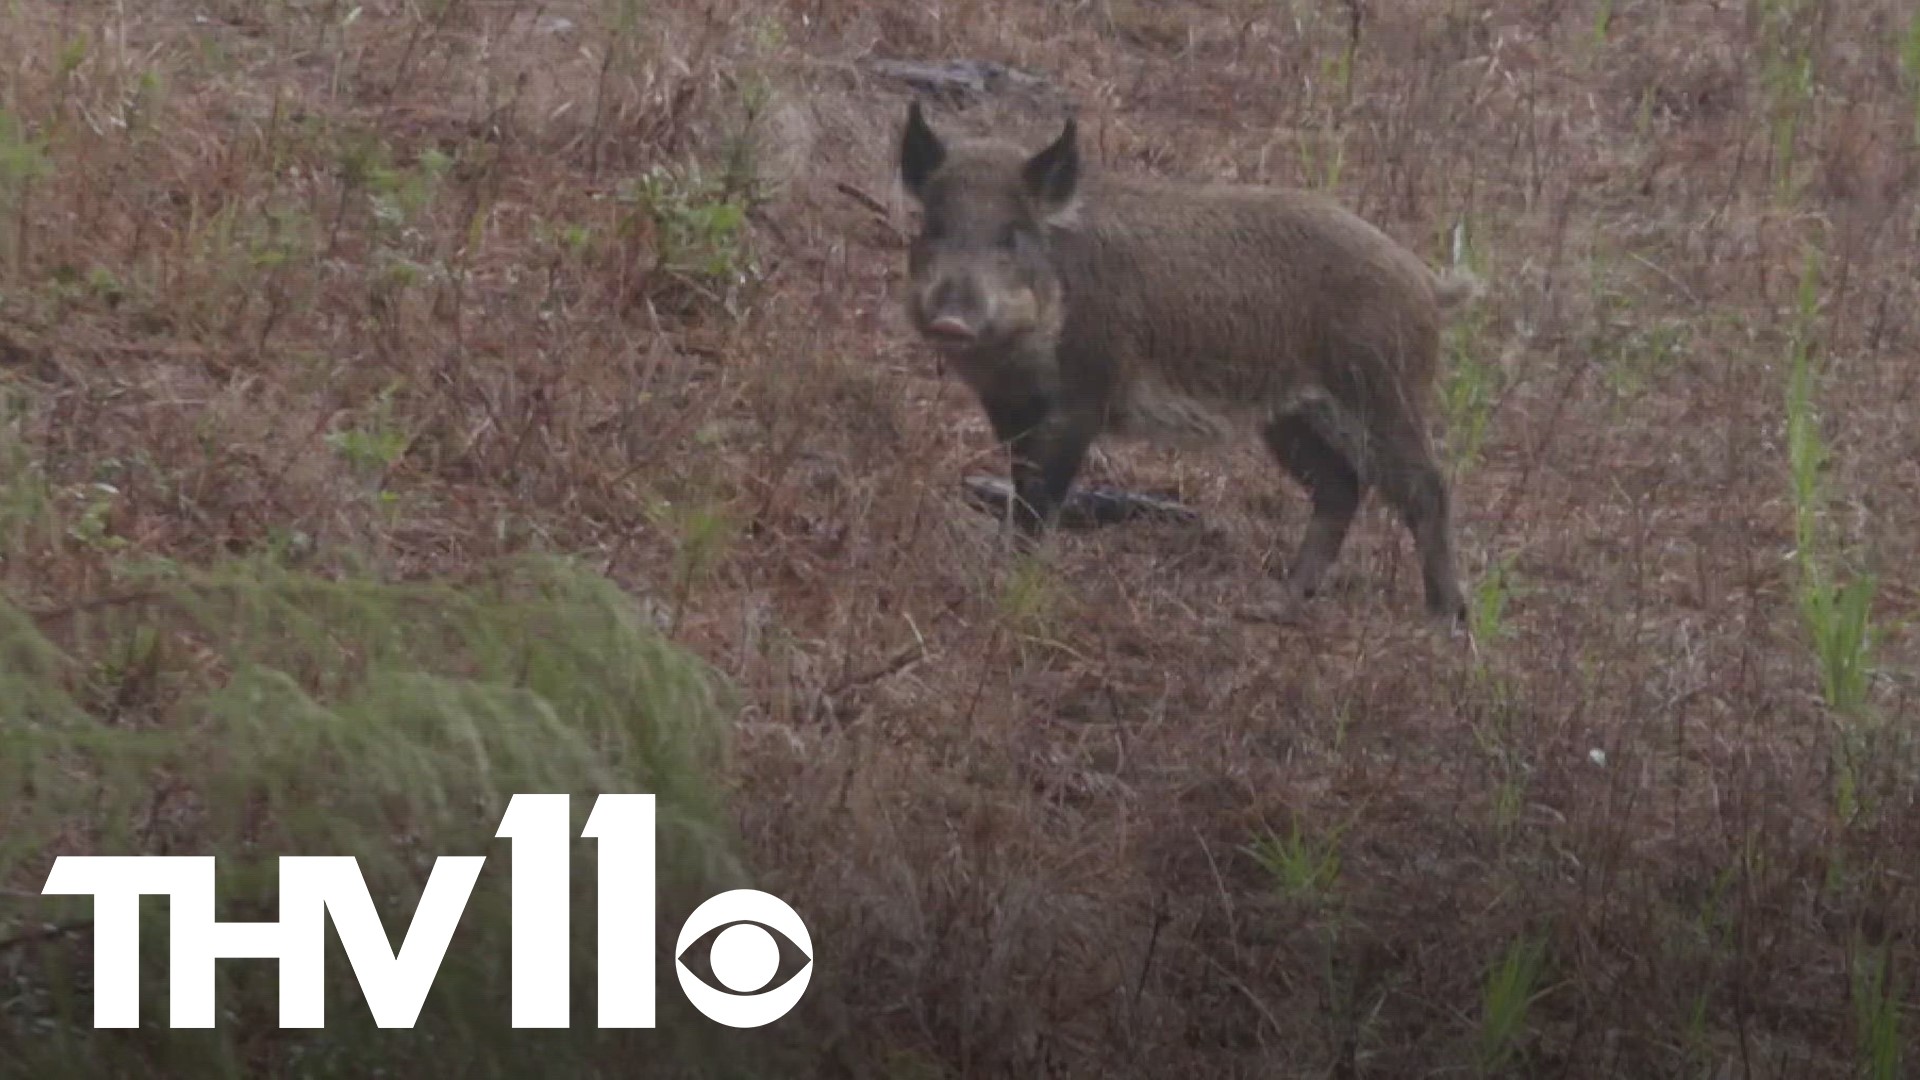 Feral hogs have become a big problem for farmers and ranchers. Though the problem mostly impacts rural Arkansas, experts believe metro areas could be next.